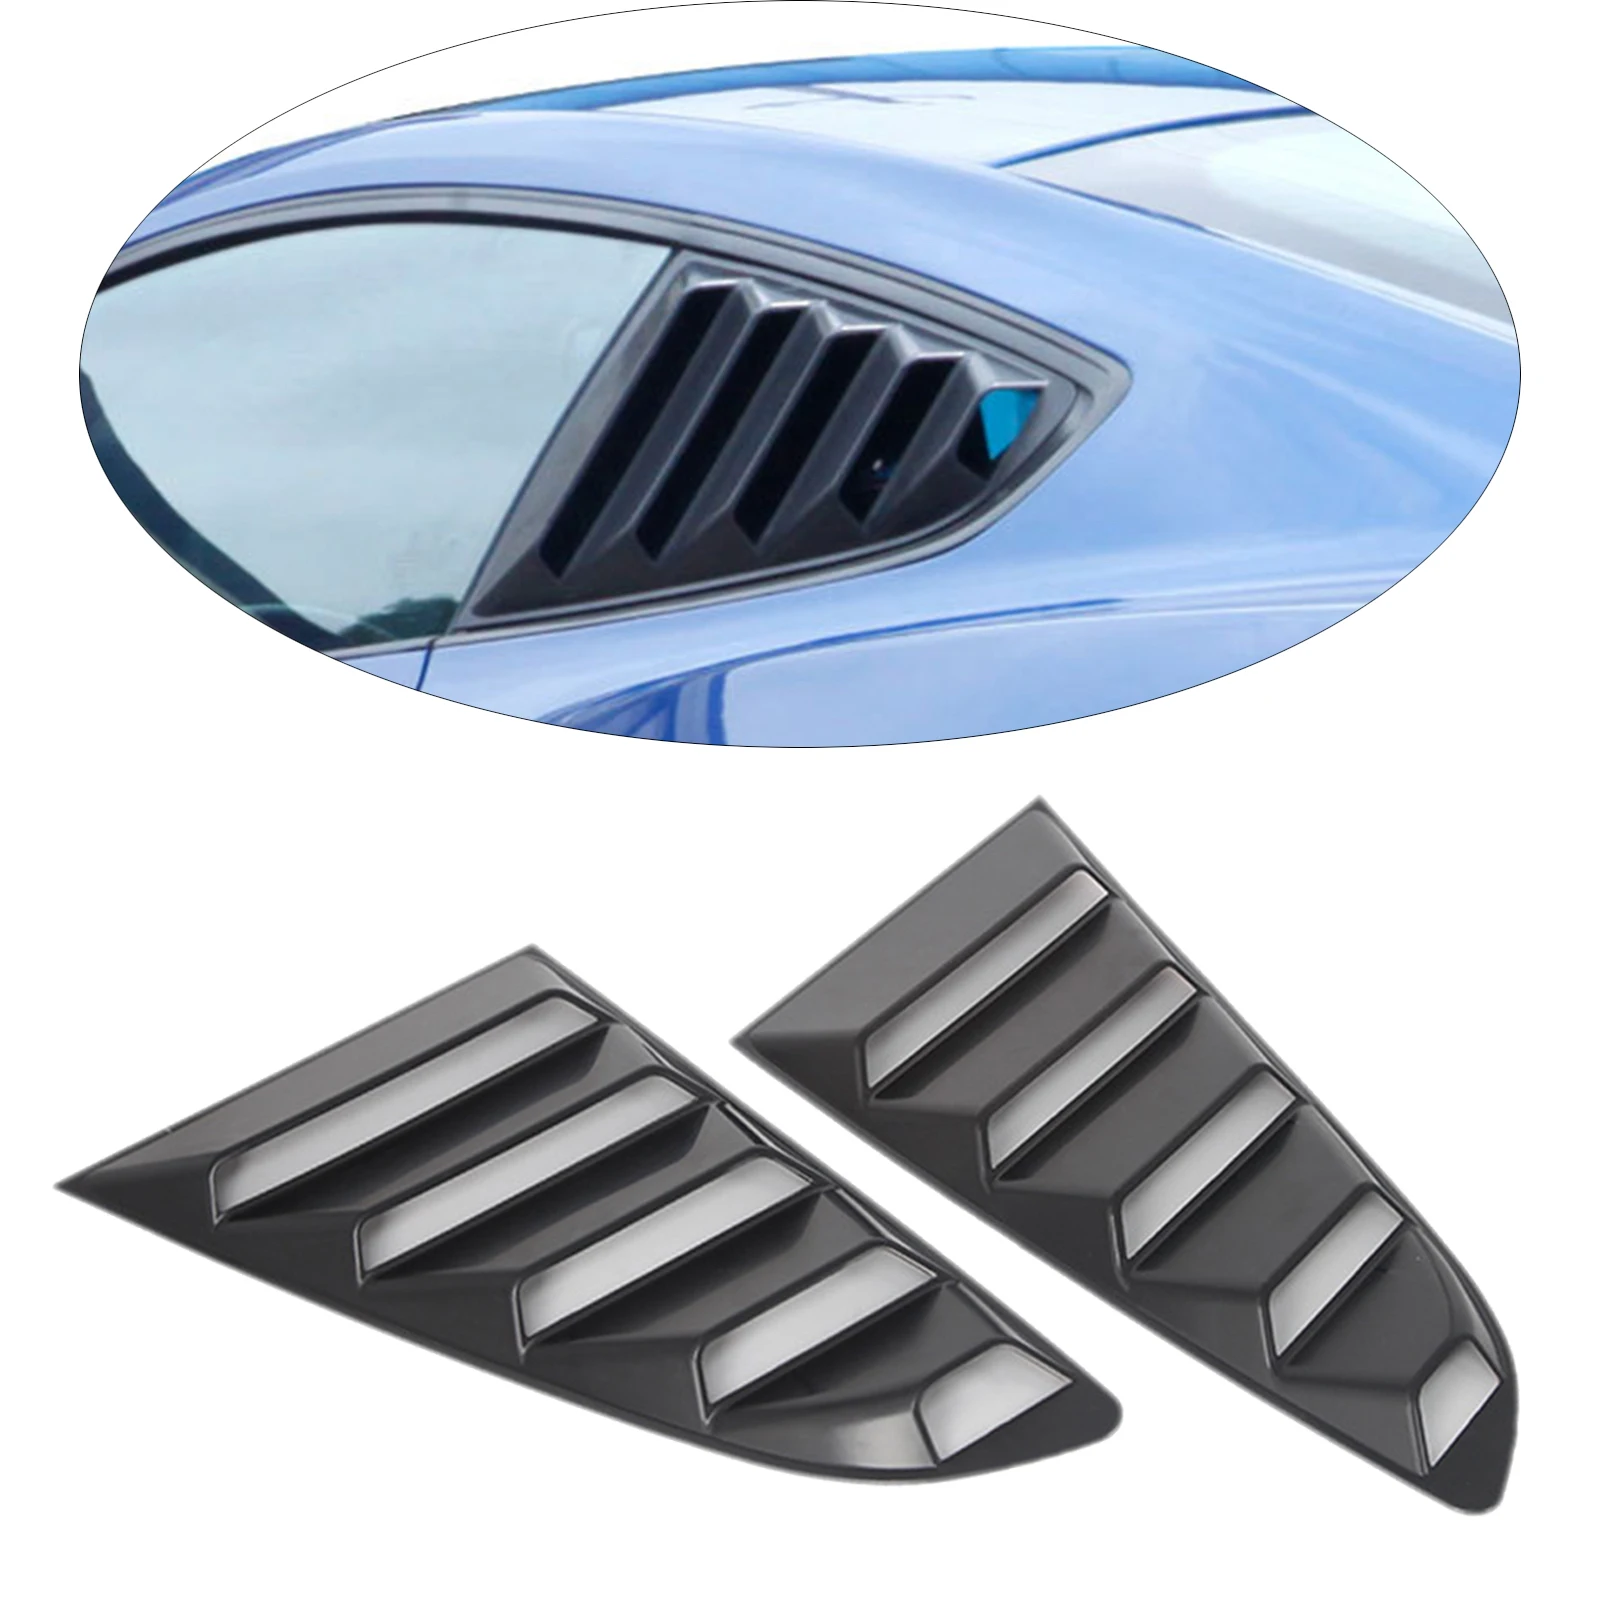 2Pcs Rear Quarter Side Window Louvers Shutter Air Vent Scoop Shades Black Cover for Ford Mustang 2015-Present